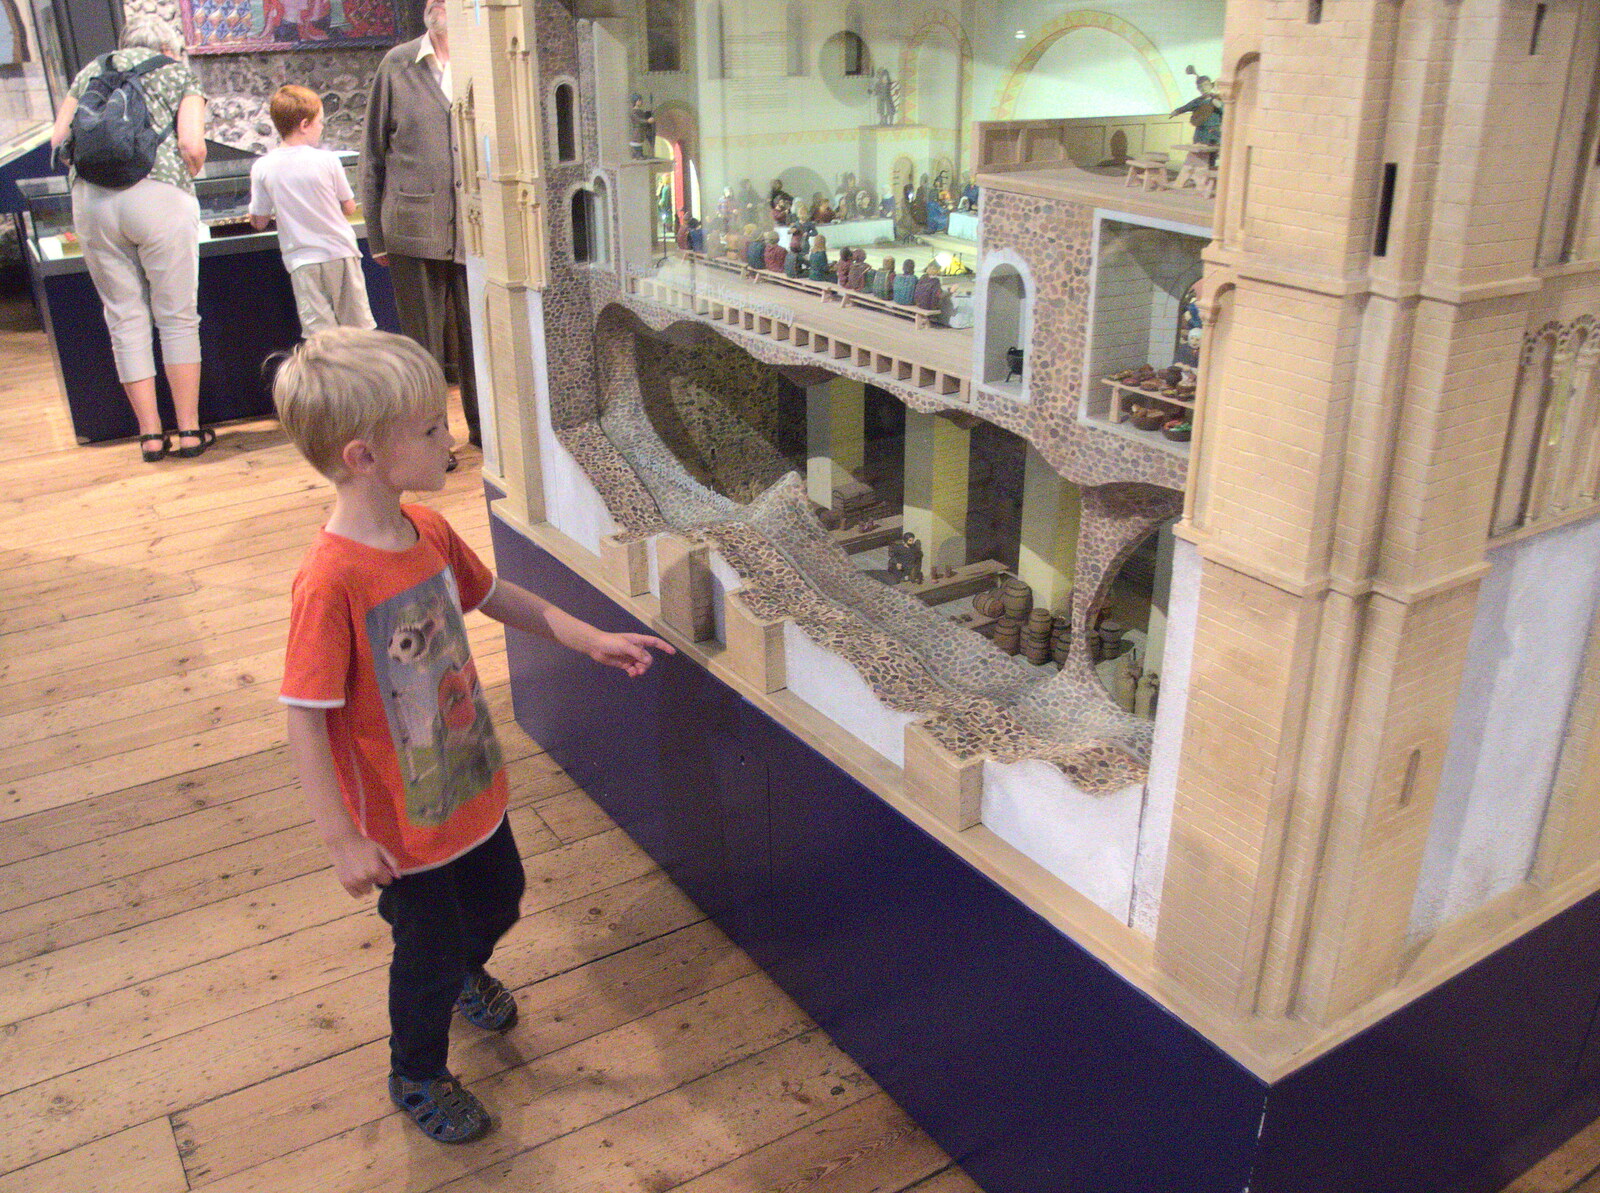 Swordfights at Norwich Castle, Norwich, Norfolk - 31st August 2016: Harry looks at a model of the castle